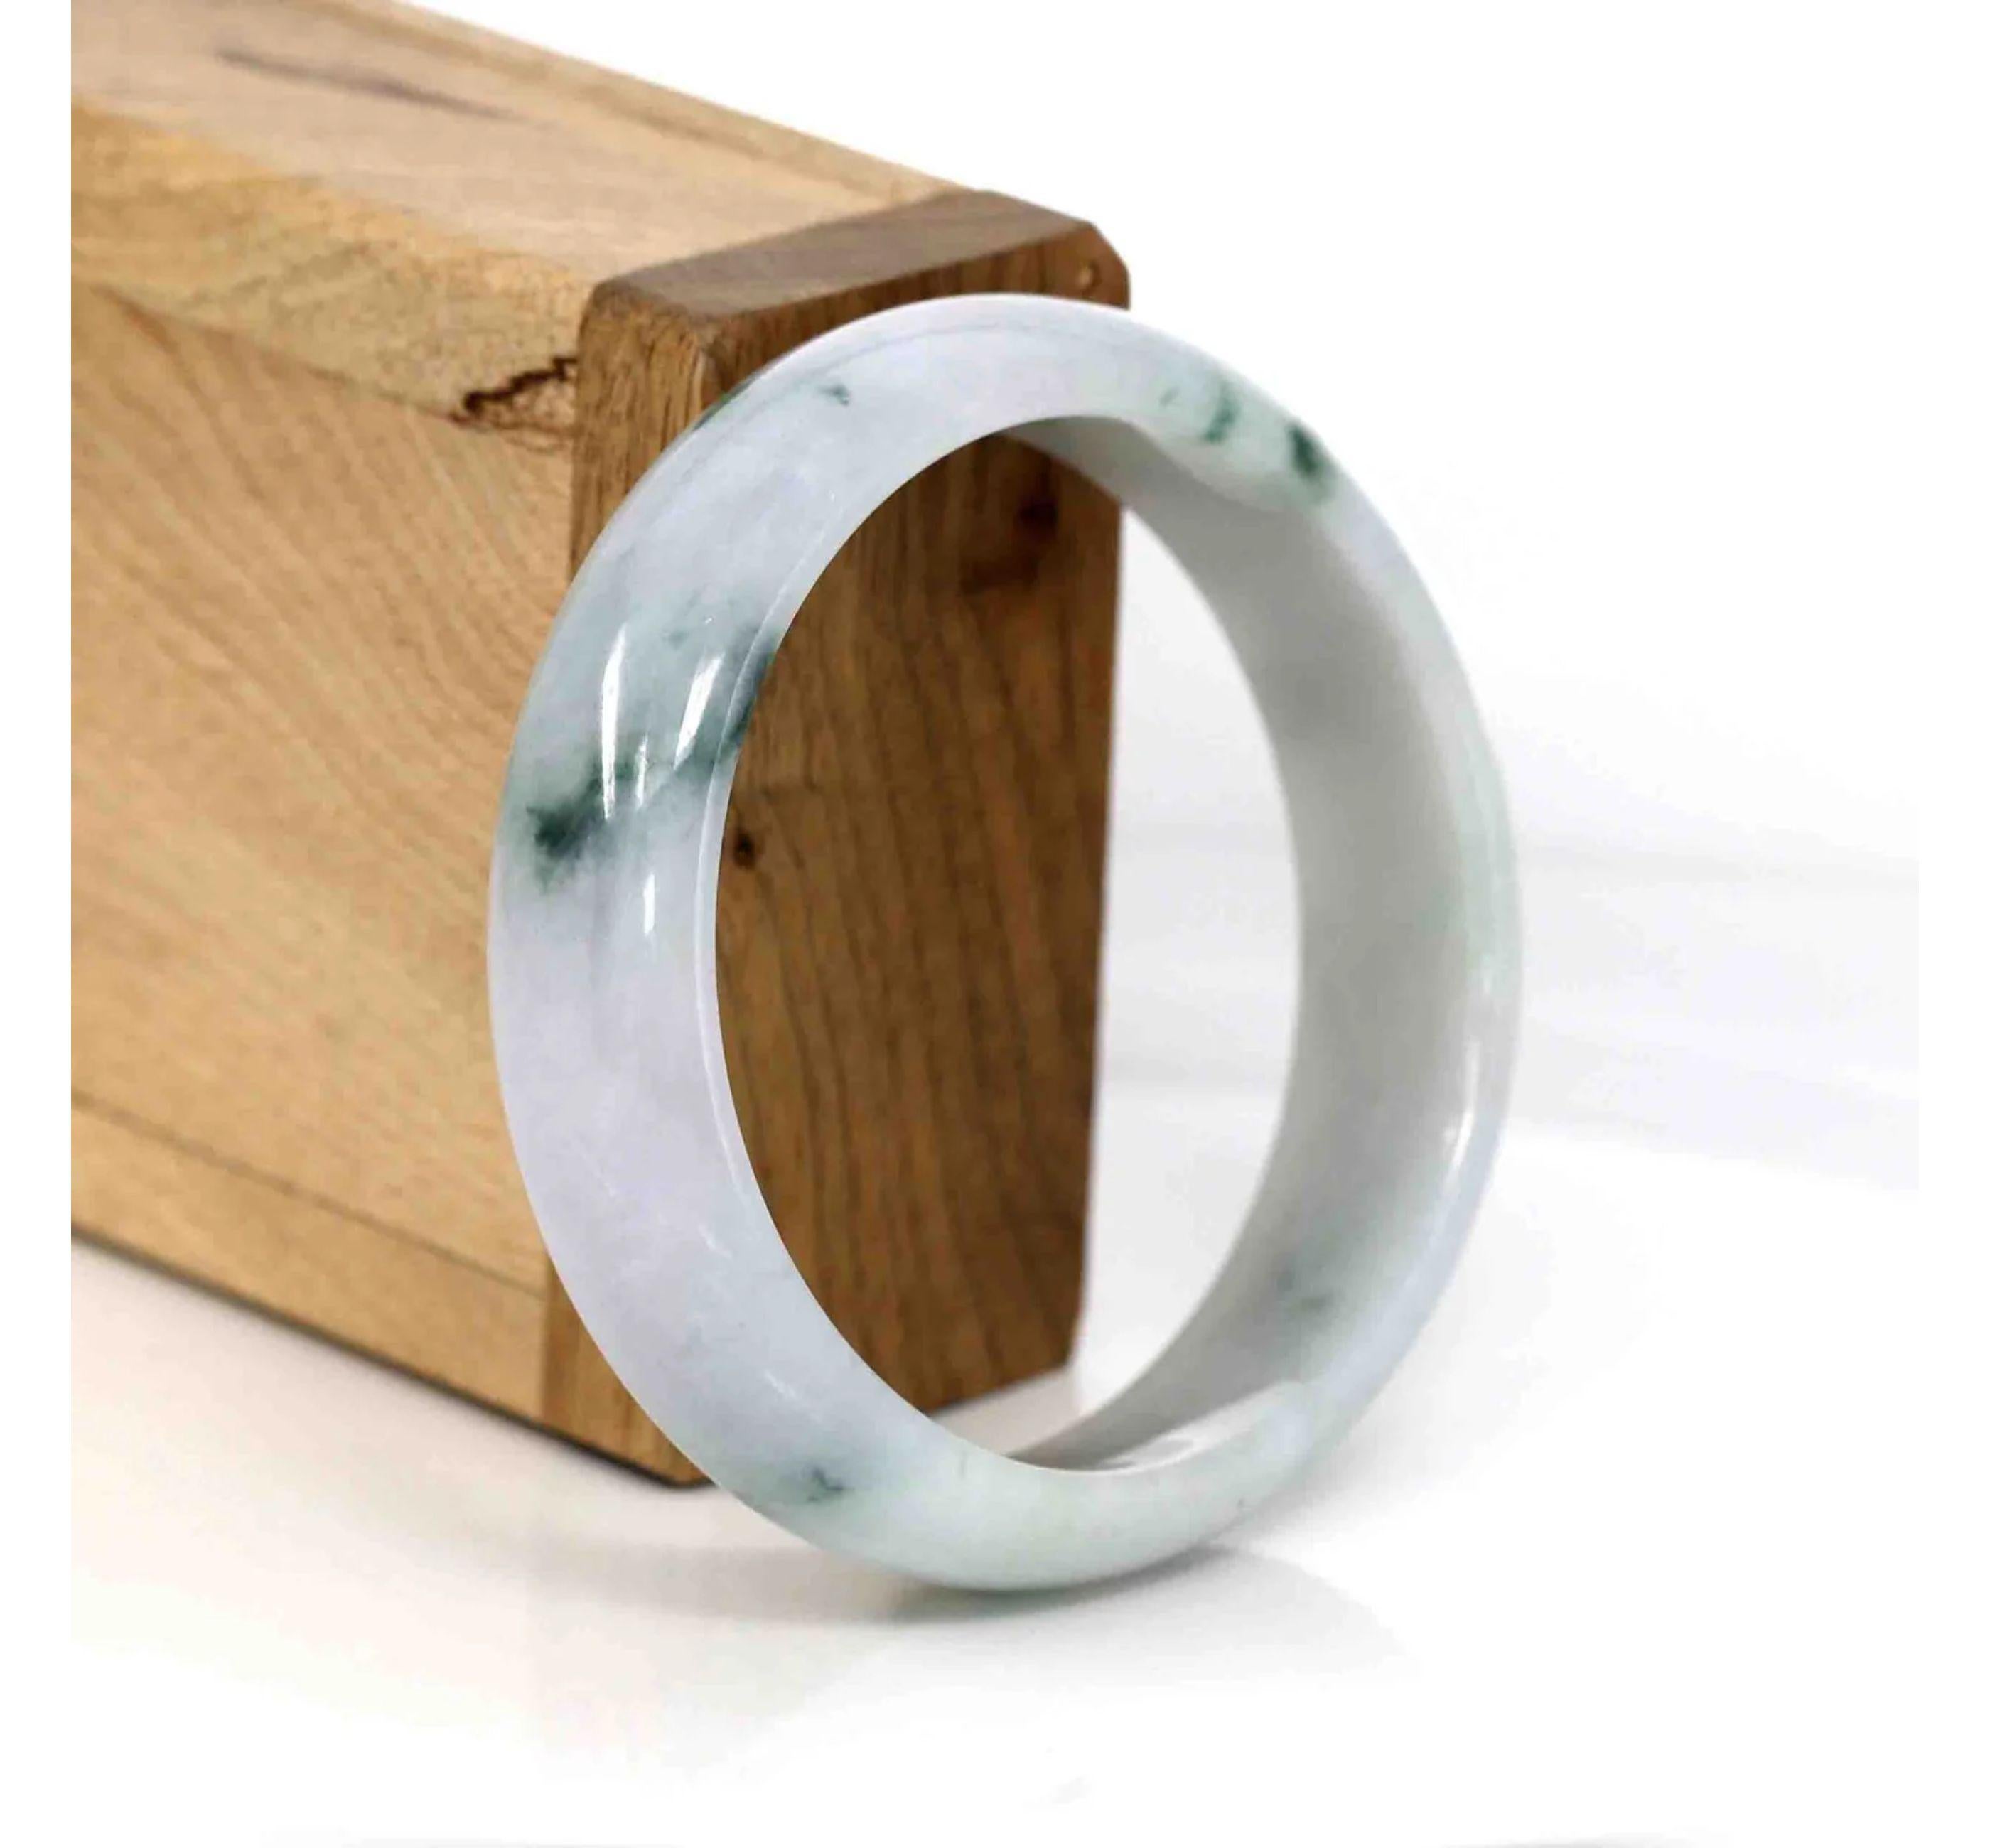 * DETAILS---Genuine Burmese Jadeite Jade Bangle Bracelet. This bangle is made with genuine Burmese Jadeite jade, The jade texture is very smooth and translucent with some blue green color inside. The blue green color looks very nice as landscape